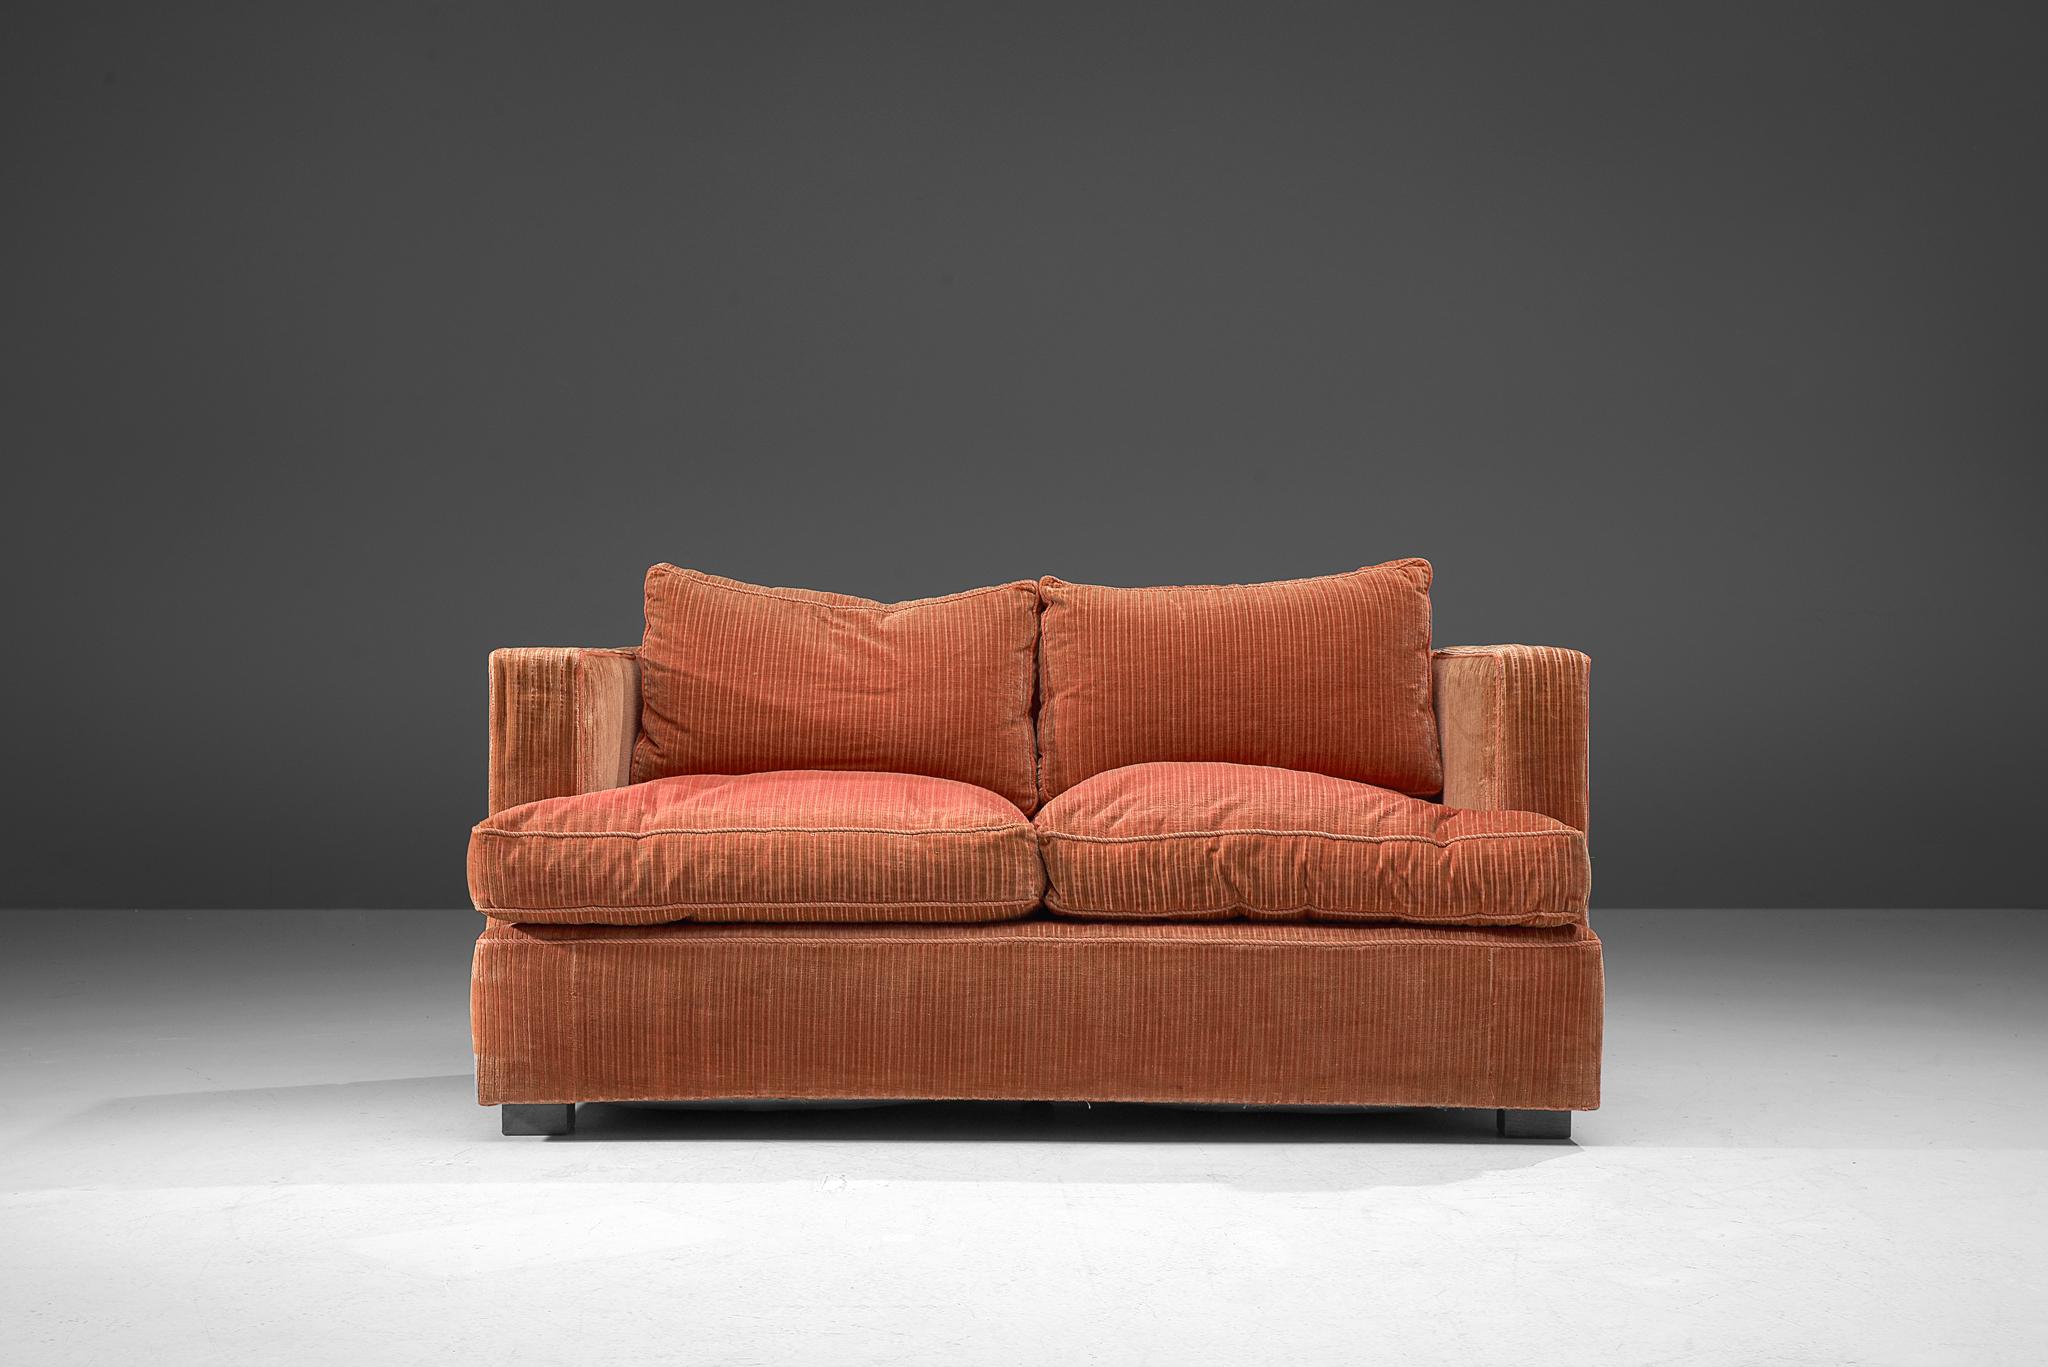 Sofa, corduroy velvet, wood, Italy, 1970s

This delicate sofa has a cozy and bulky appeal. An orange to peach velvet has been used to cover the seating. The textured surface of the fabric, consisting of vertical lines, adds a graphical touch to the